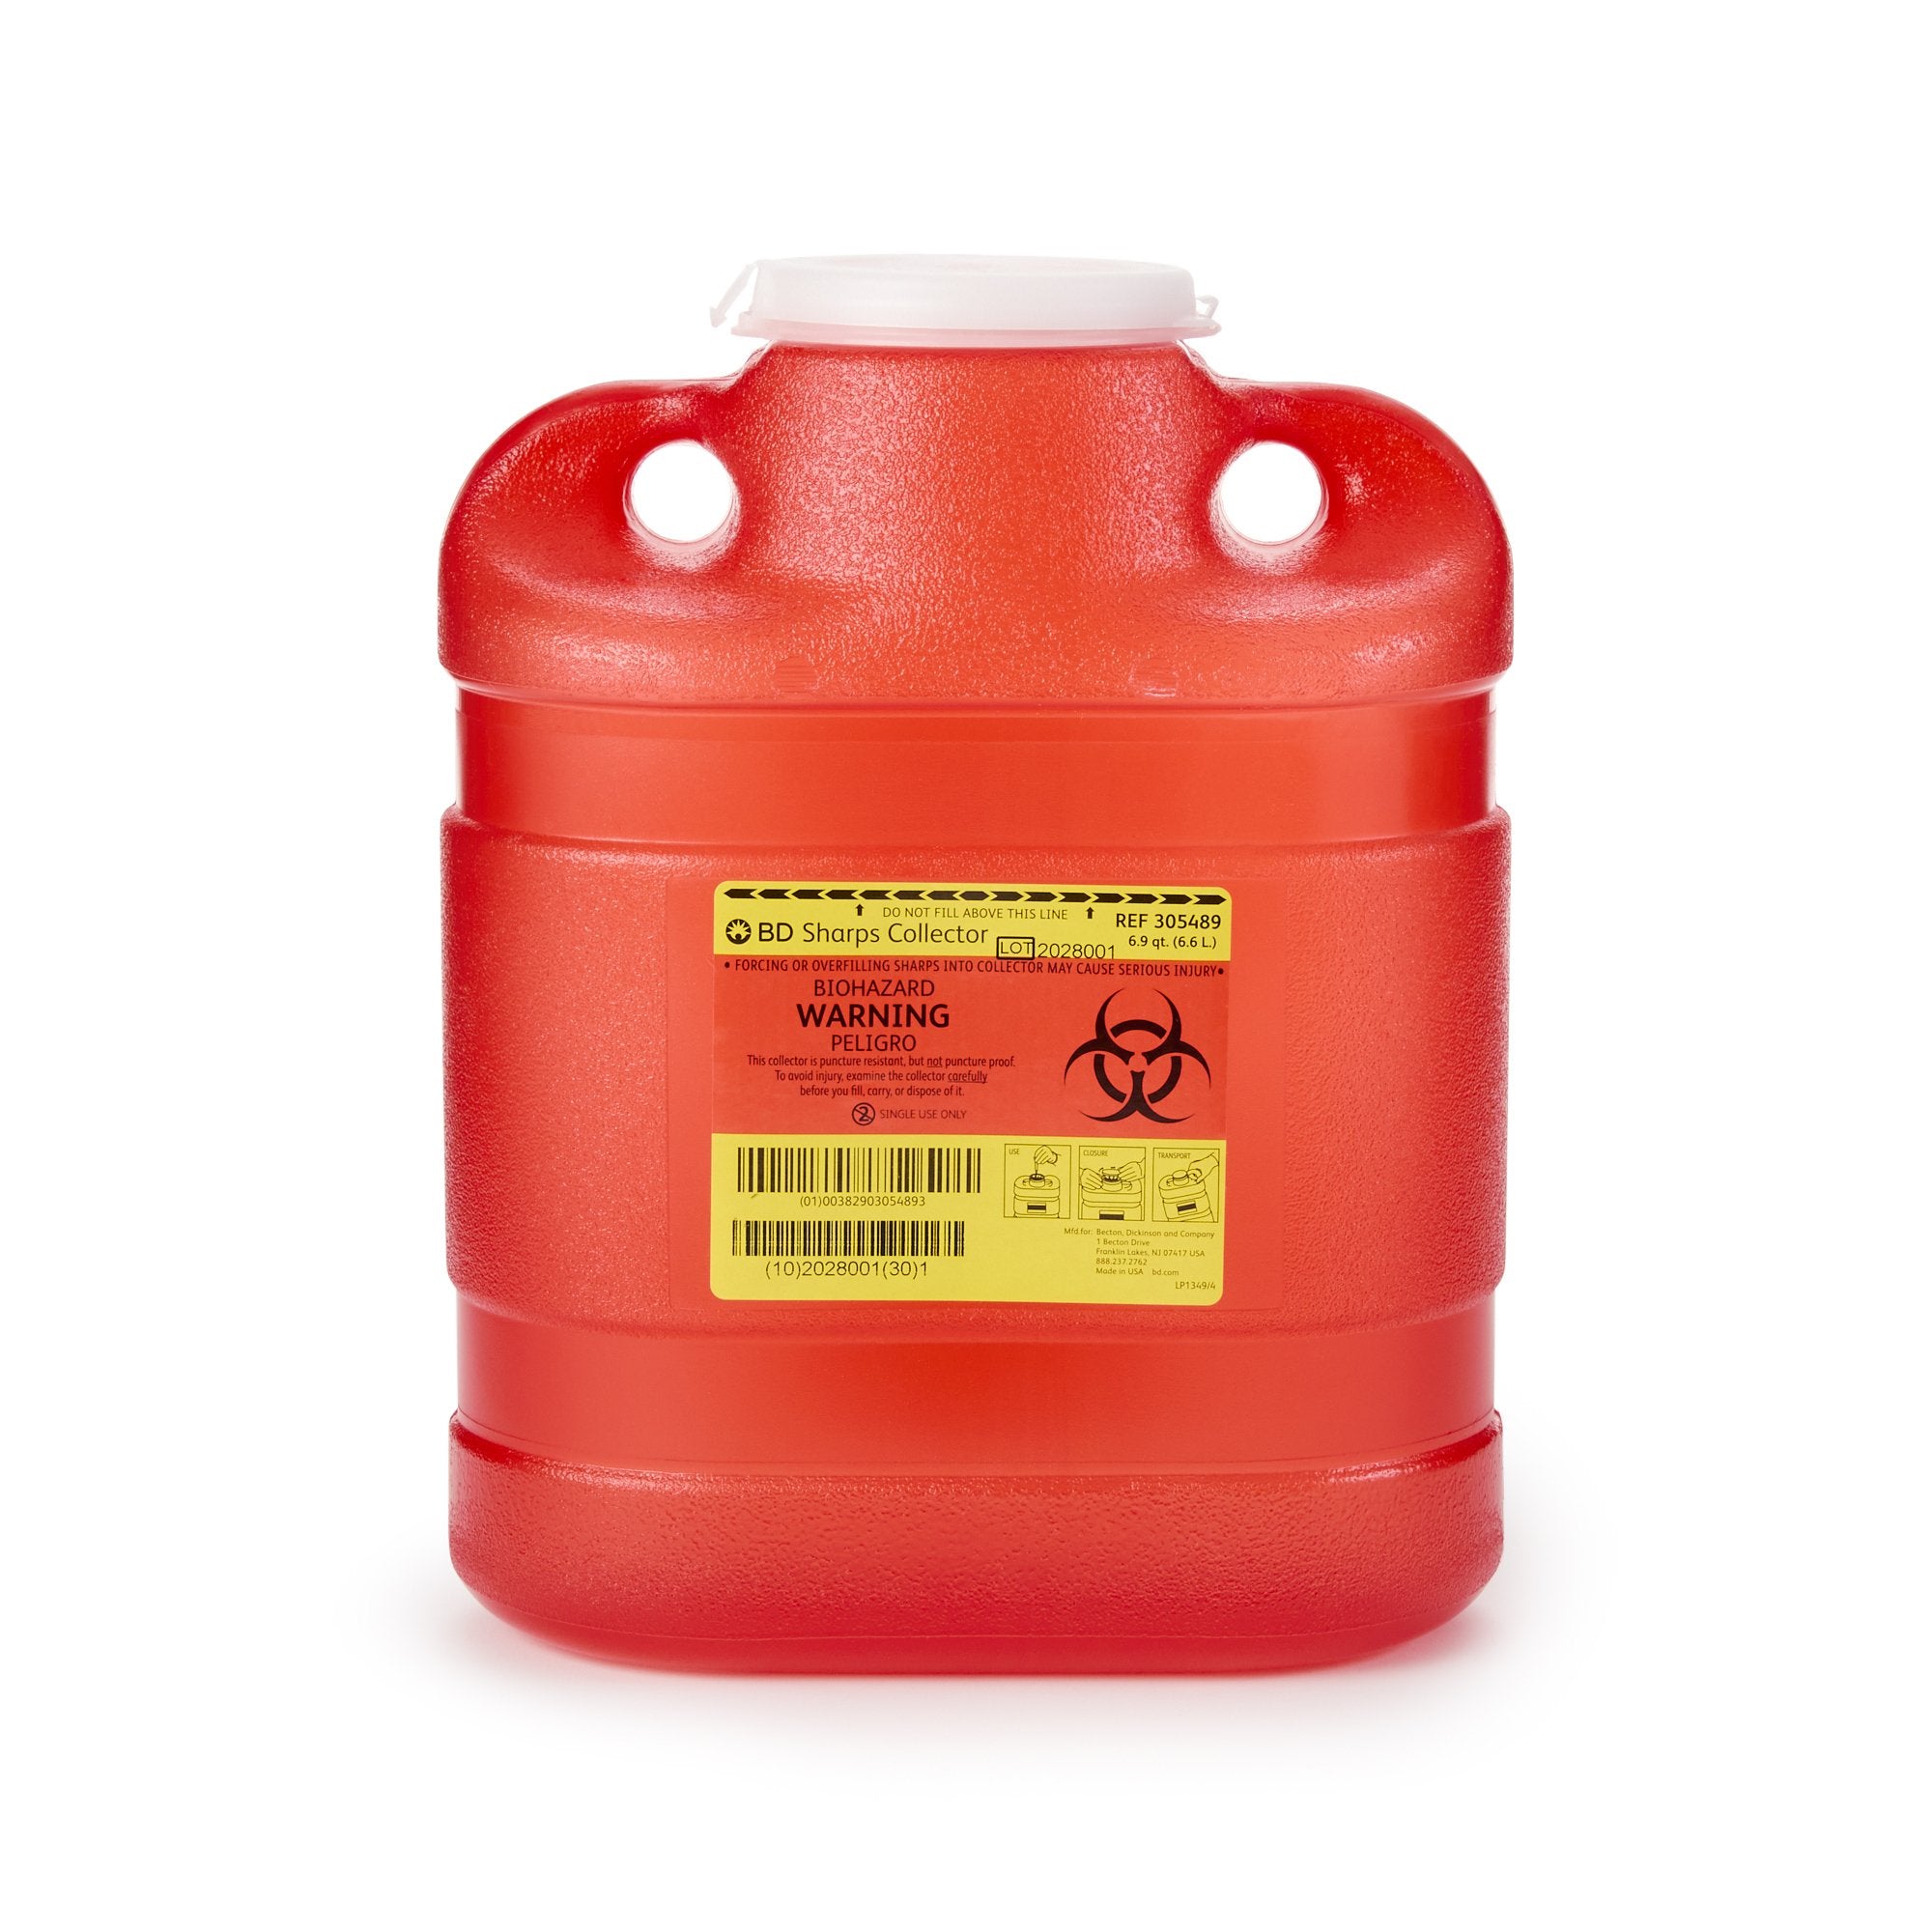 Sharps Container BD Red Base 11-1/2 H X 9-2/5 W X 5-3/10 D Inch Vertical Entry 1.725 Gallon